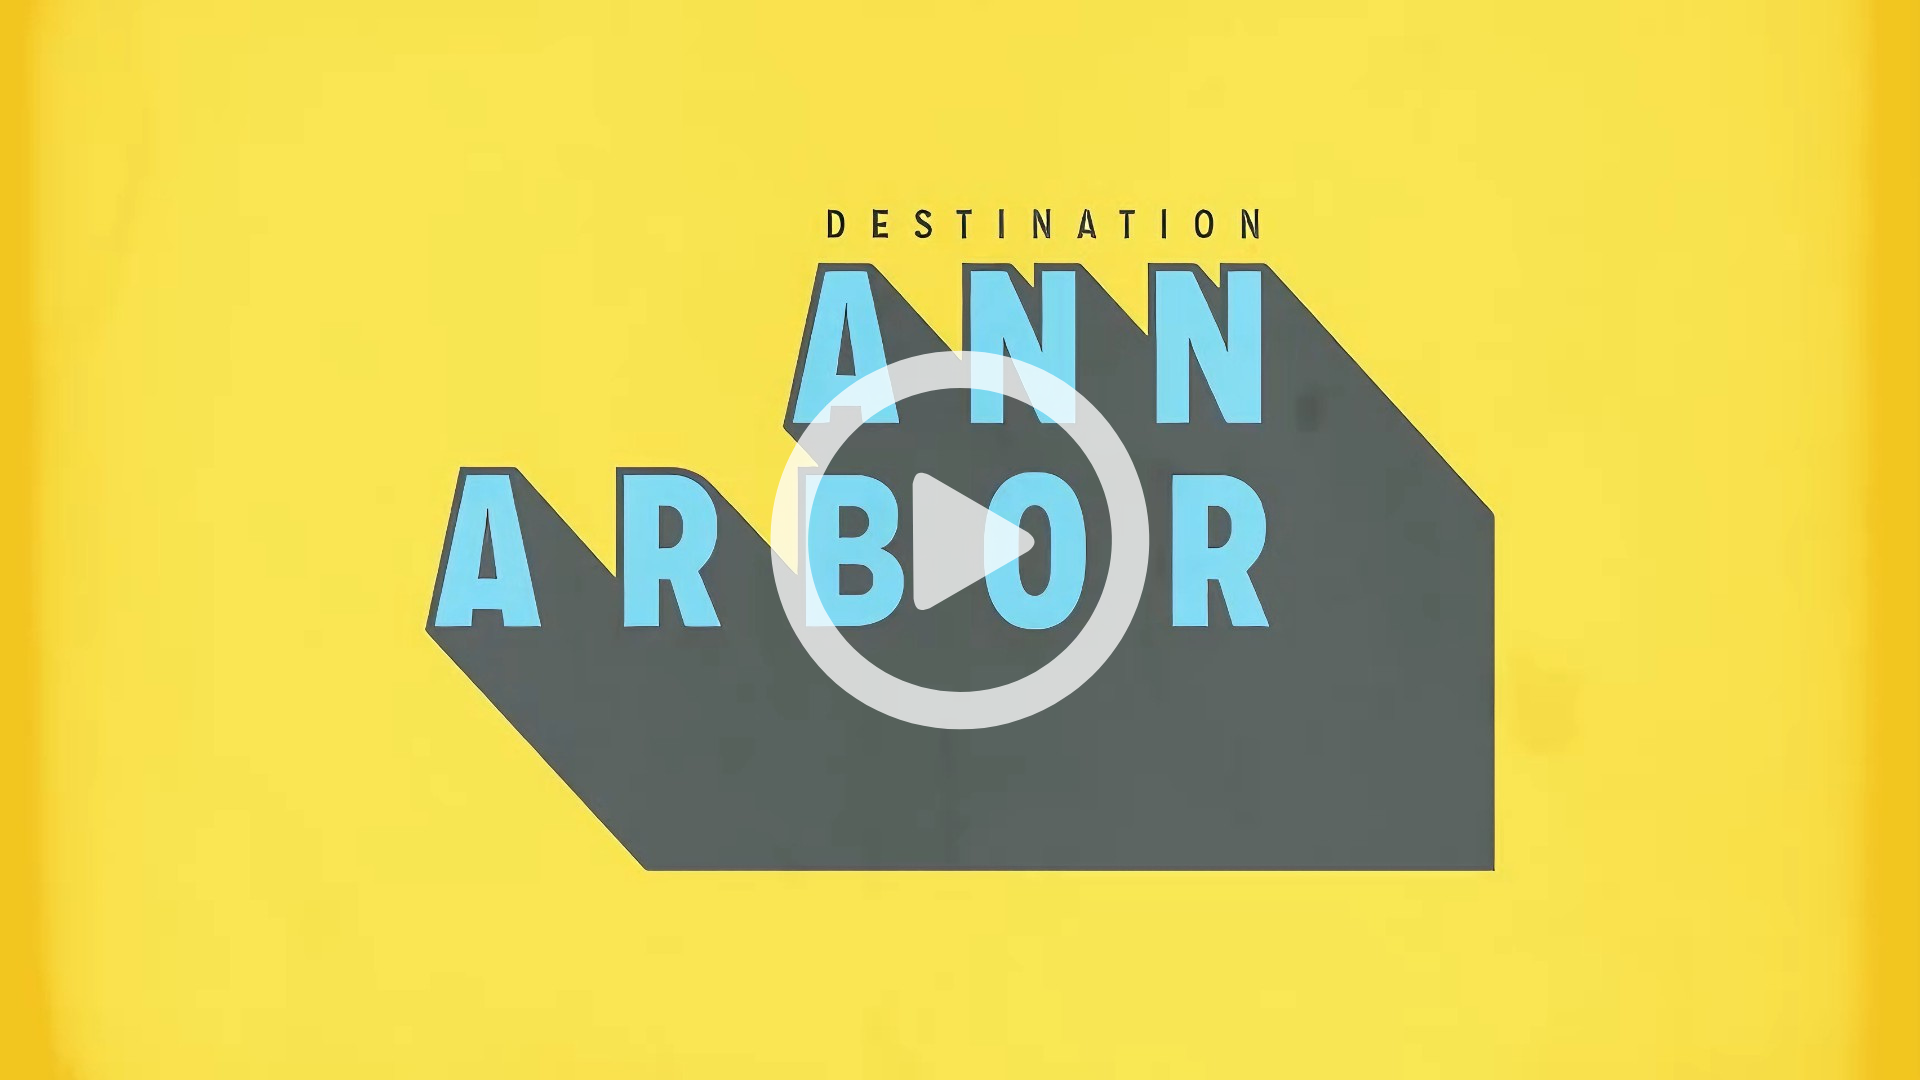 Cover image for Destination Ann Arbor's 2023 Year in Review video for their Annual Community Meeting